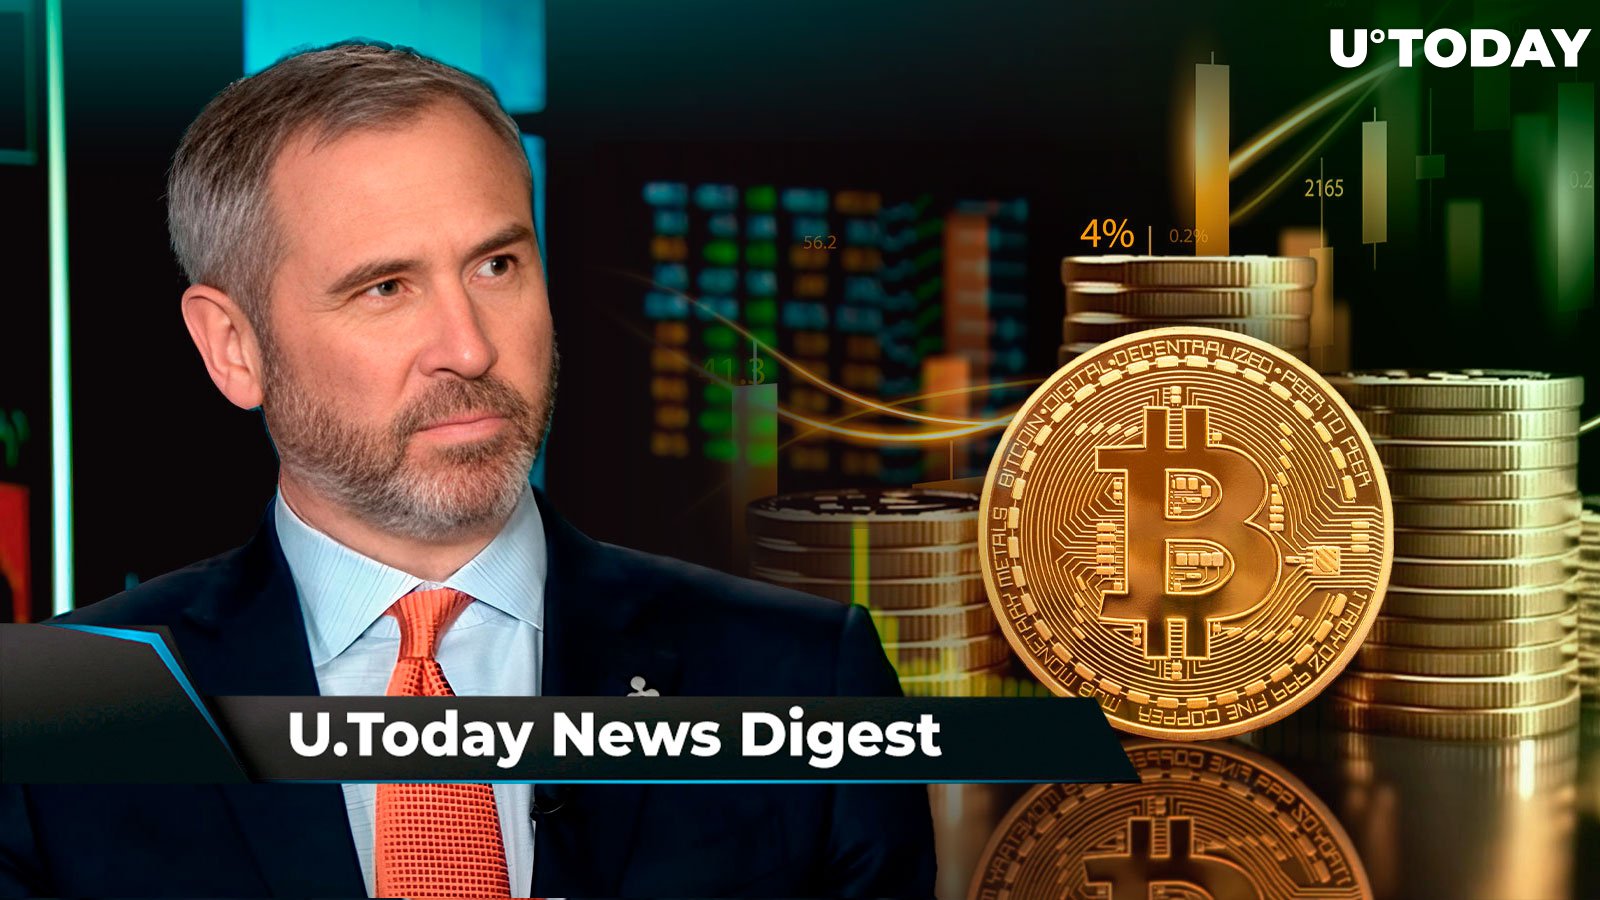 Ripple CEO Makes Stunning Market Prediction, Here's Why April 10 Is Crucial Date for Crypto and BTC Markets, SHIB Burns Surge Drastically: Crypto News Digest by U.Today